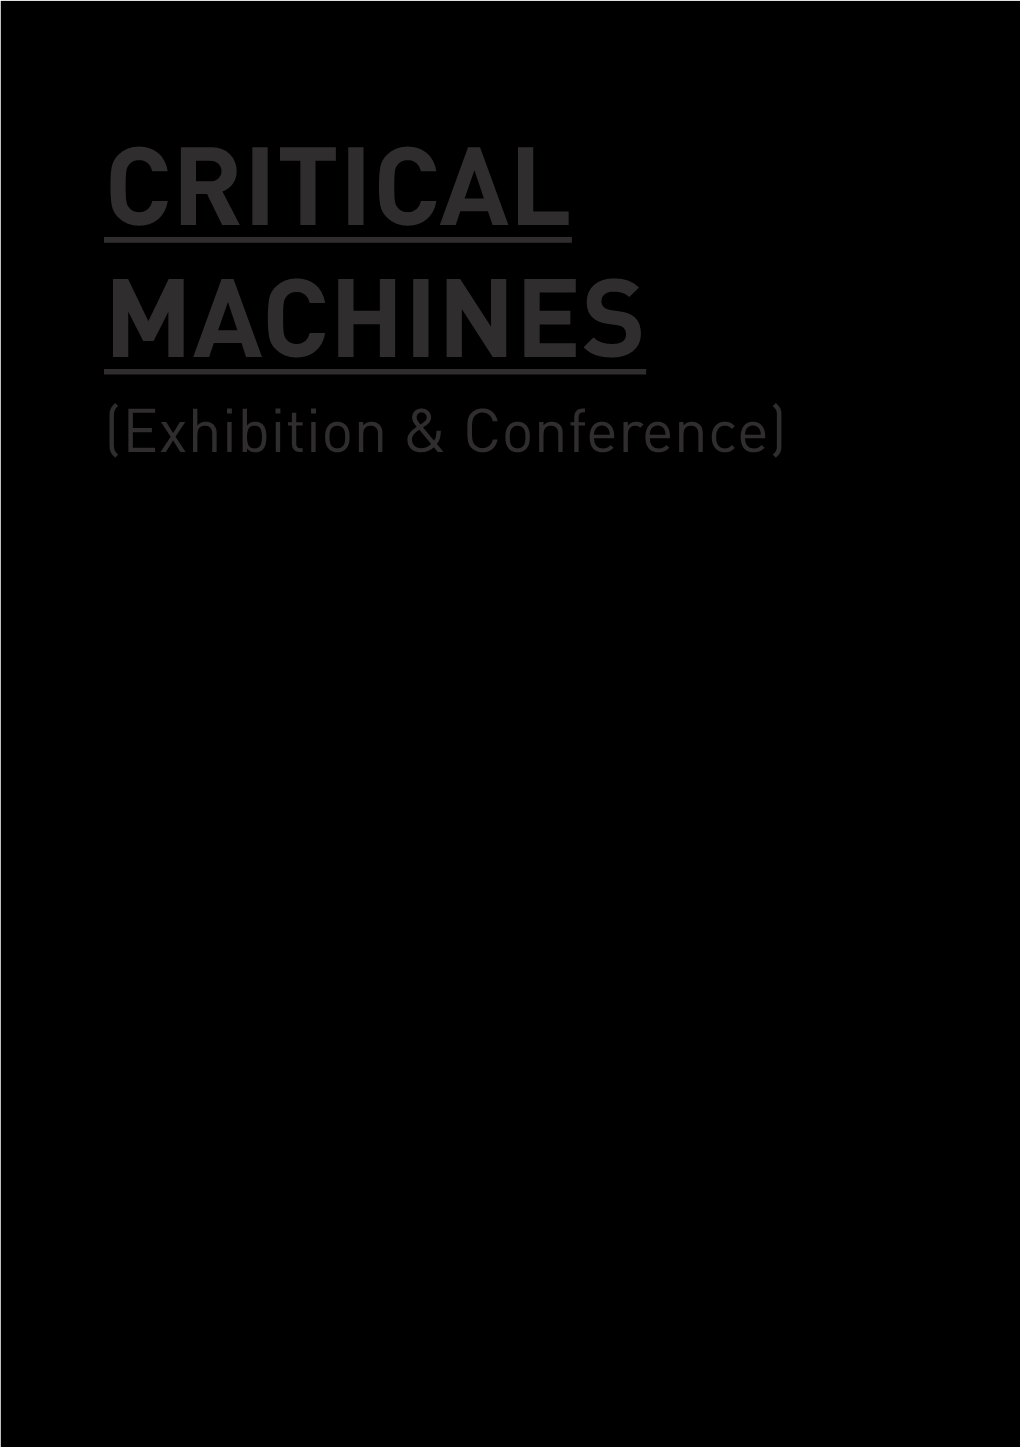 CRITICAL MACHINES (Exhibition & Conference)